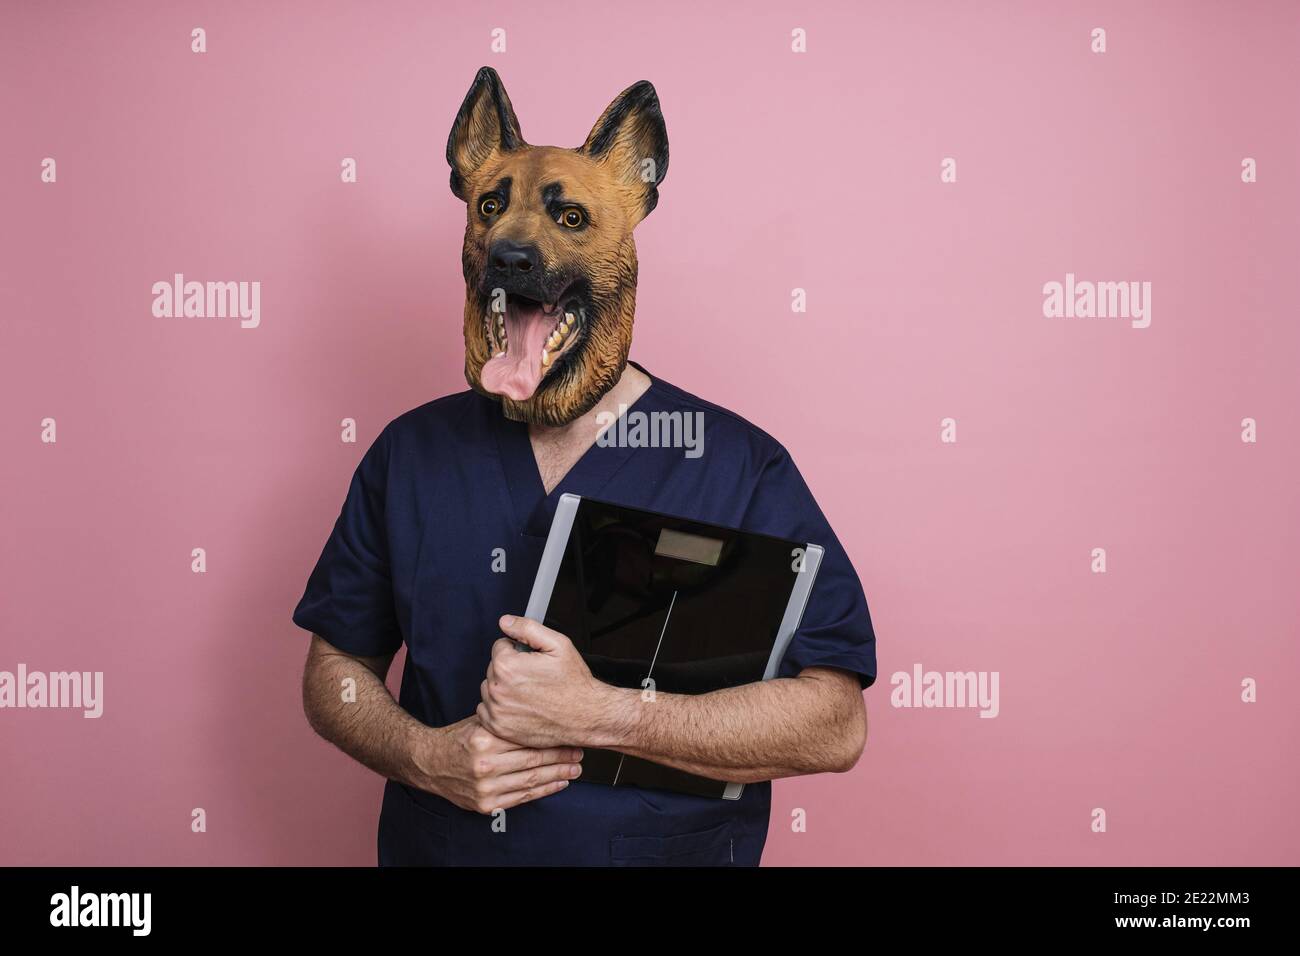 https://c8.alamy.com/comp/2E22MM3/young-man-in-a-latex-dog-head-mask-holding-a-weight-scale-on-a-pink-background-2E22MM3.jpg